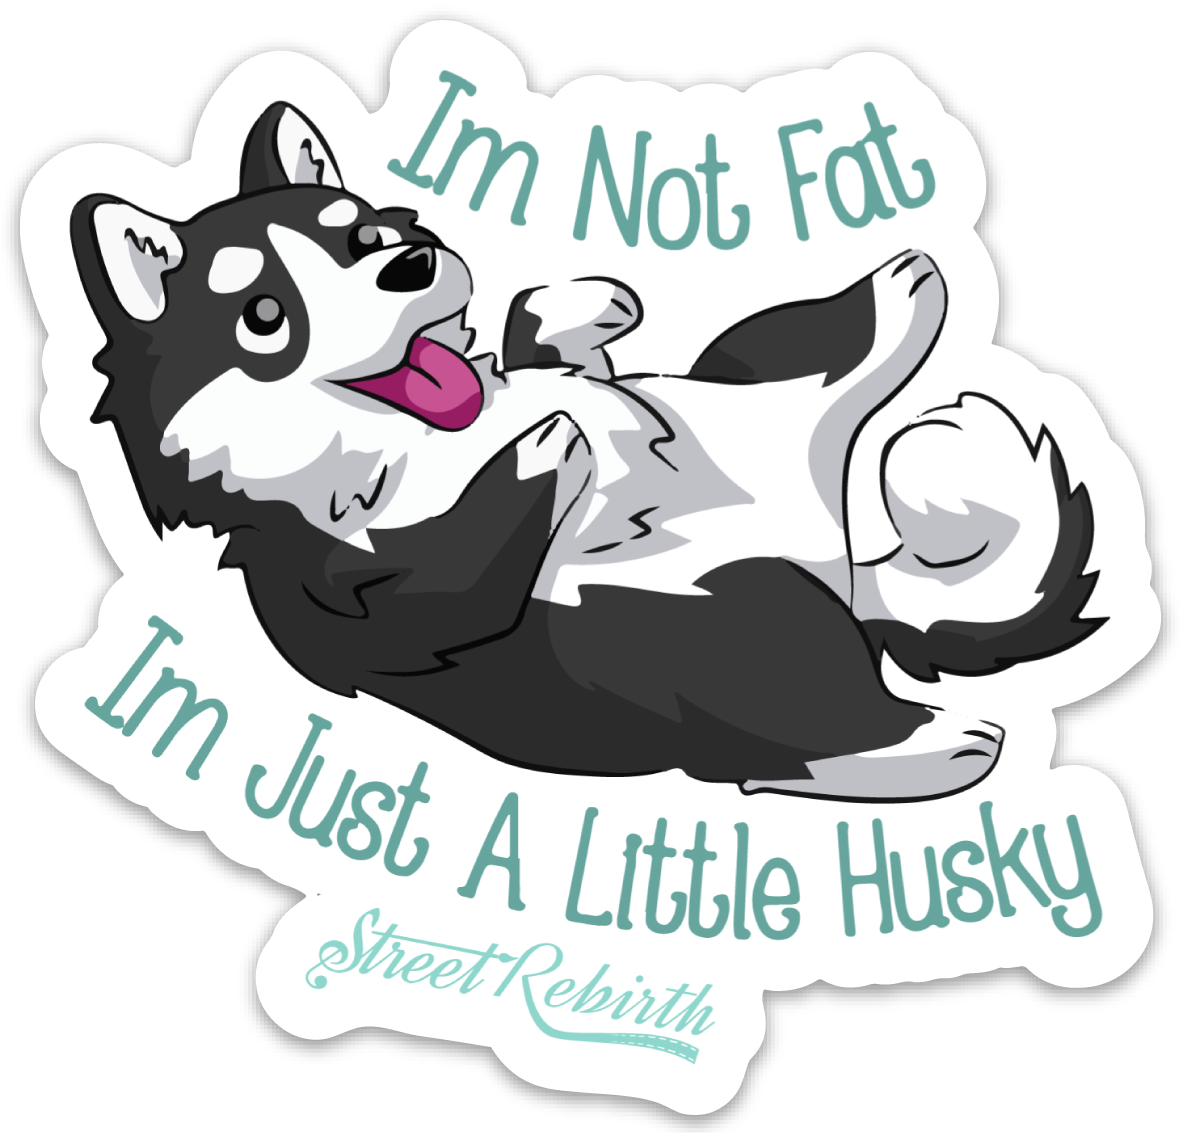 I'm Not Fat I'm Just A little Husky PUN STICKER – ONE 4 INCH WATER PROOF VINYL STICKER – FOR HYDRO FLASK, SKATEBOARD, LAPTOP, PLANNER, CAR, COLLECTING, GIFTING